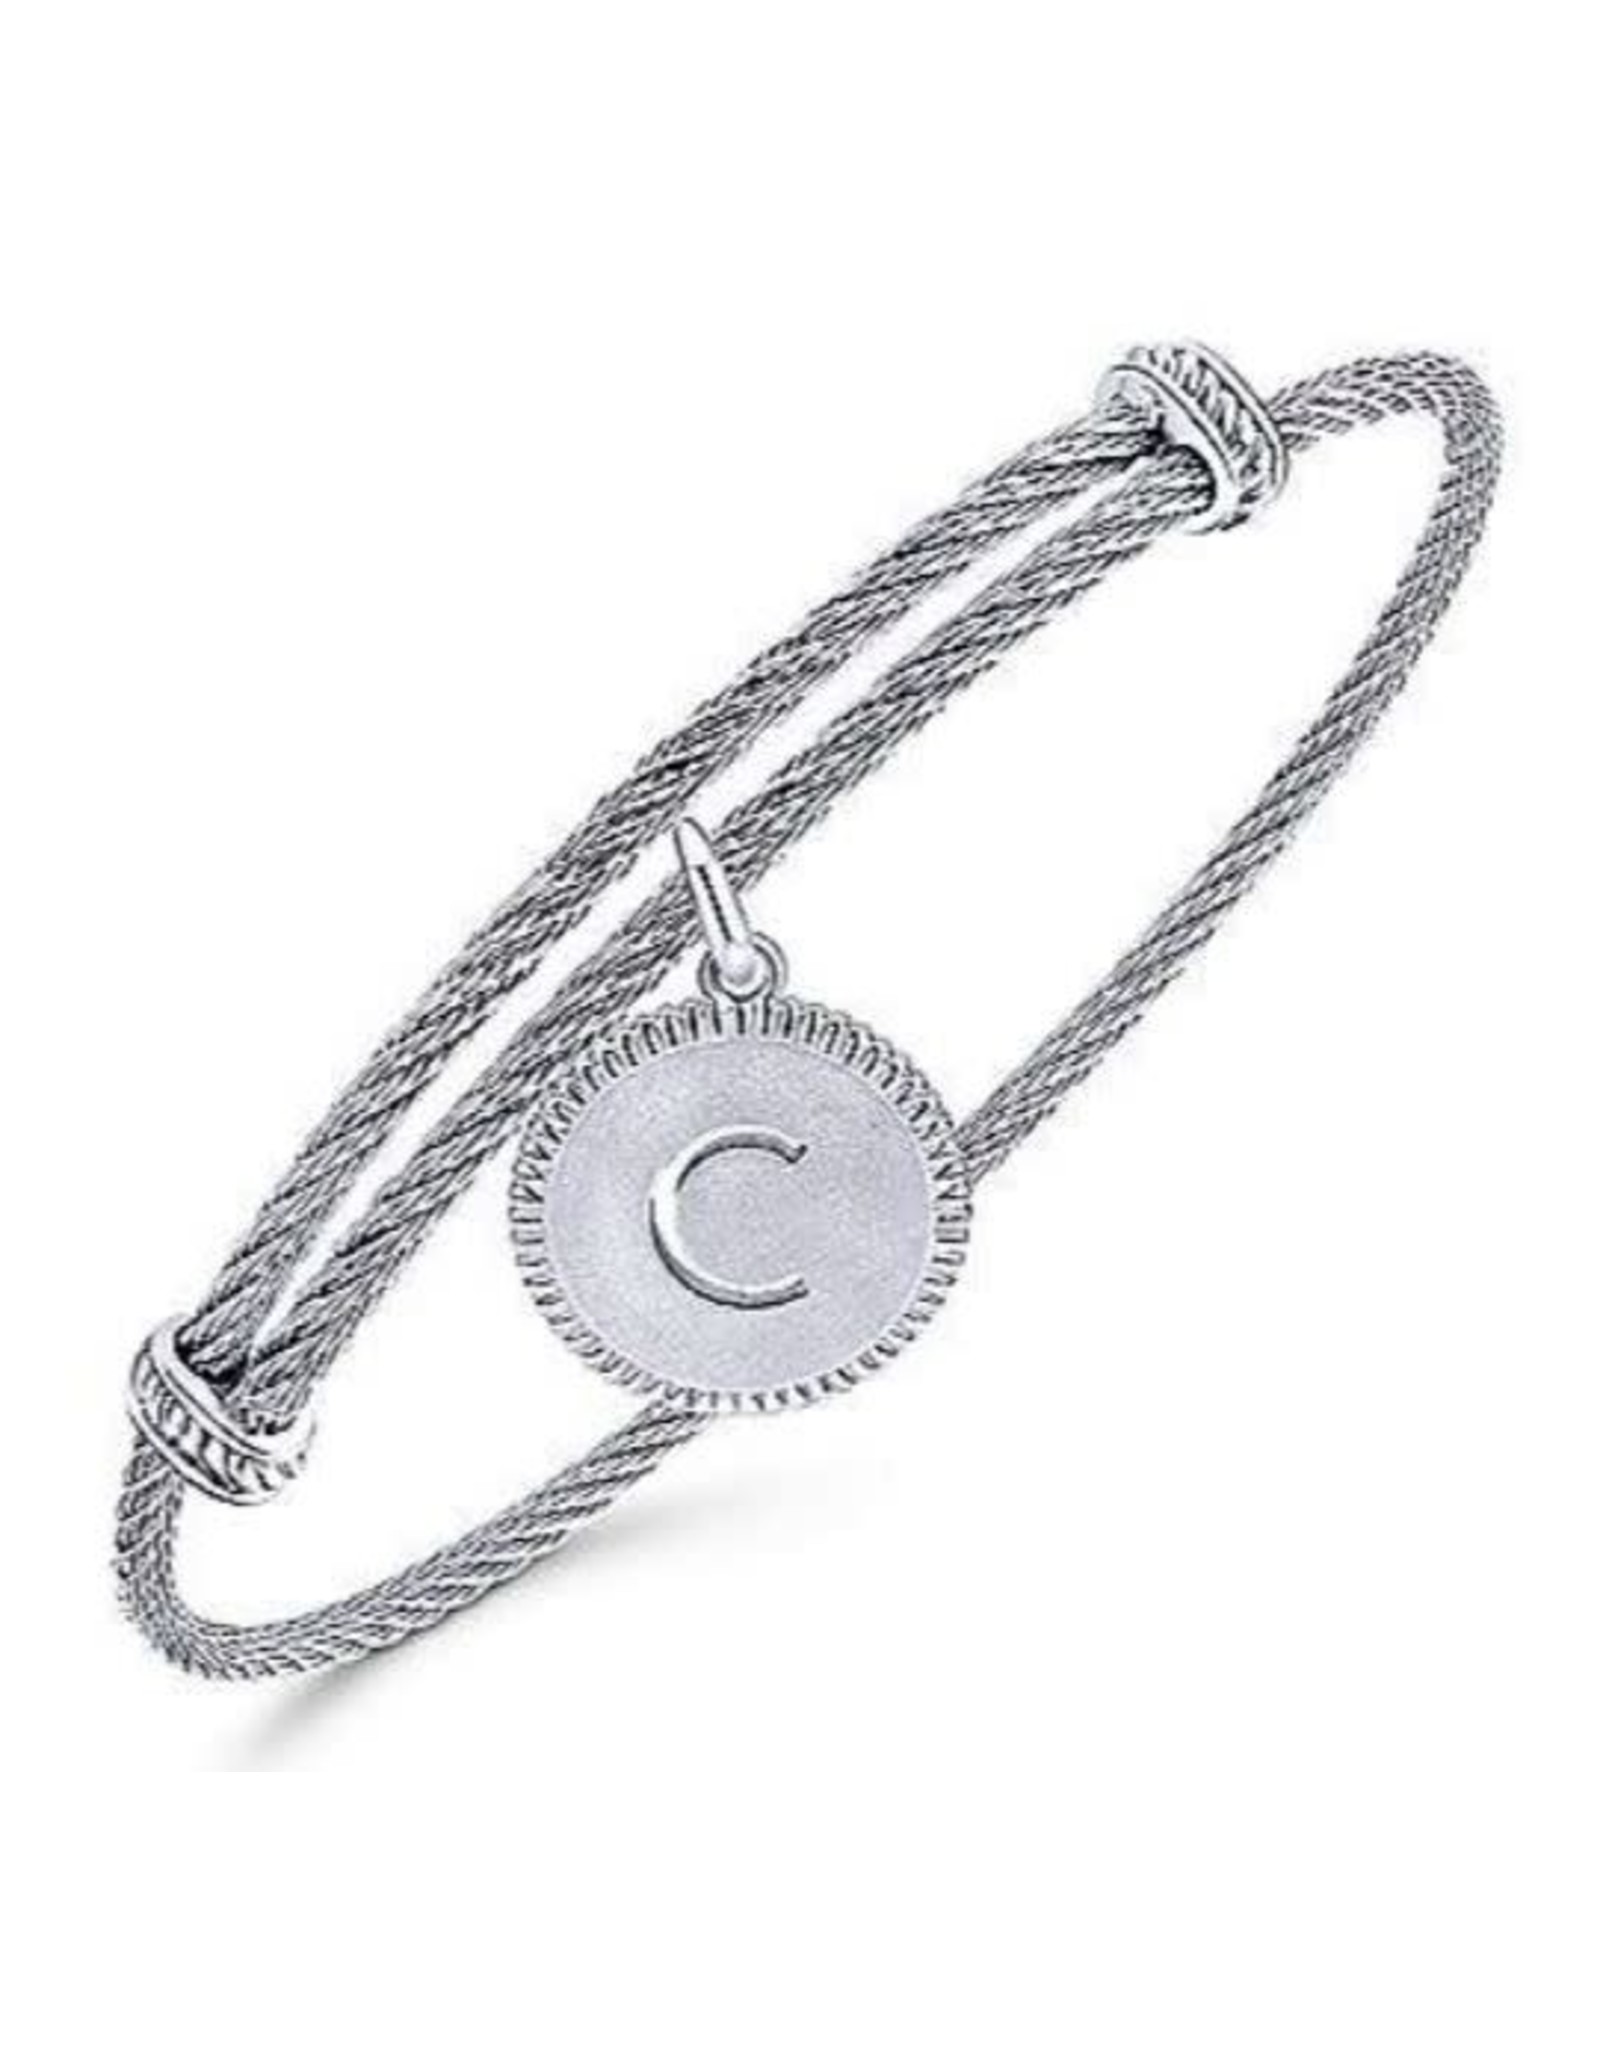 Adjustable Twisted Cable Stainless Steel Bangle with Sterling Silver Initial Charm- BG3632